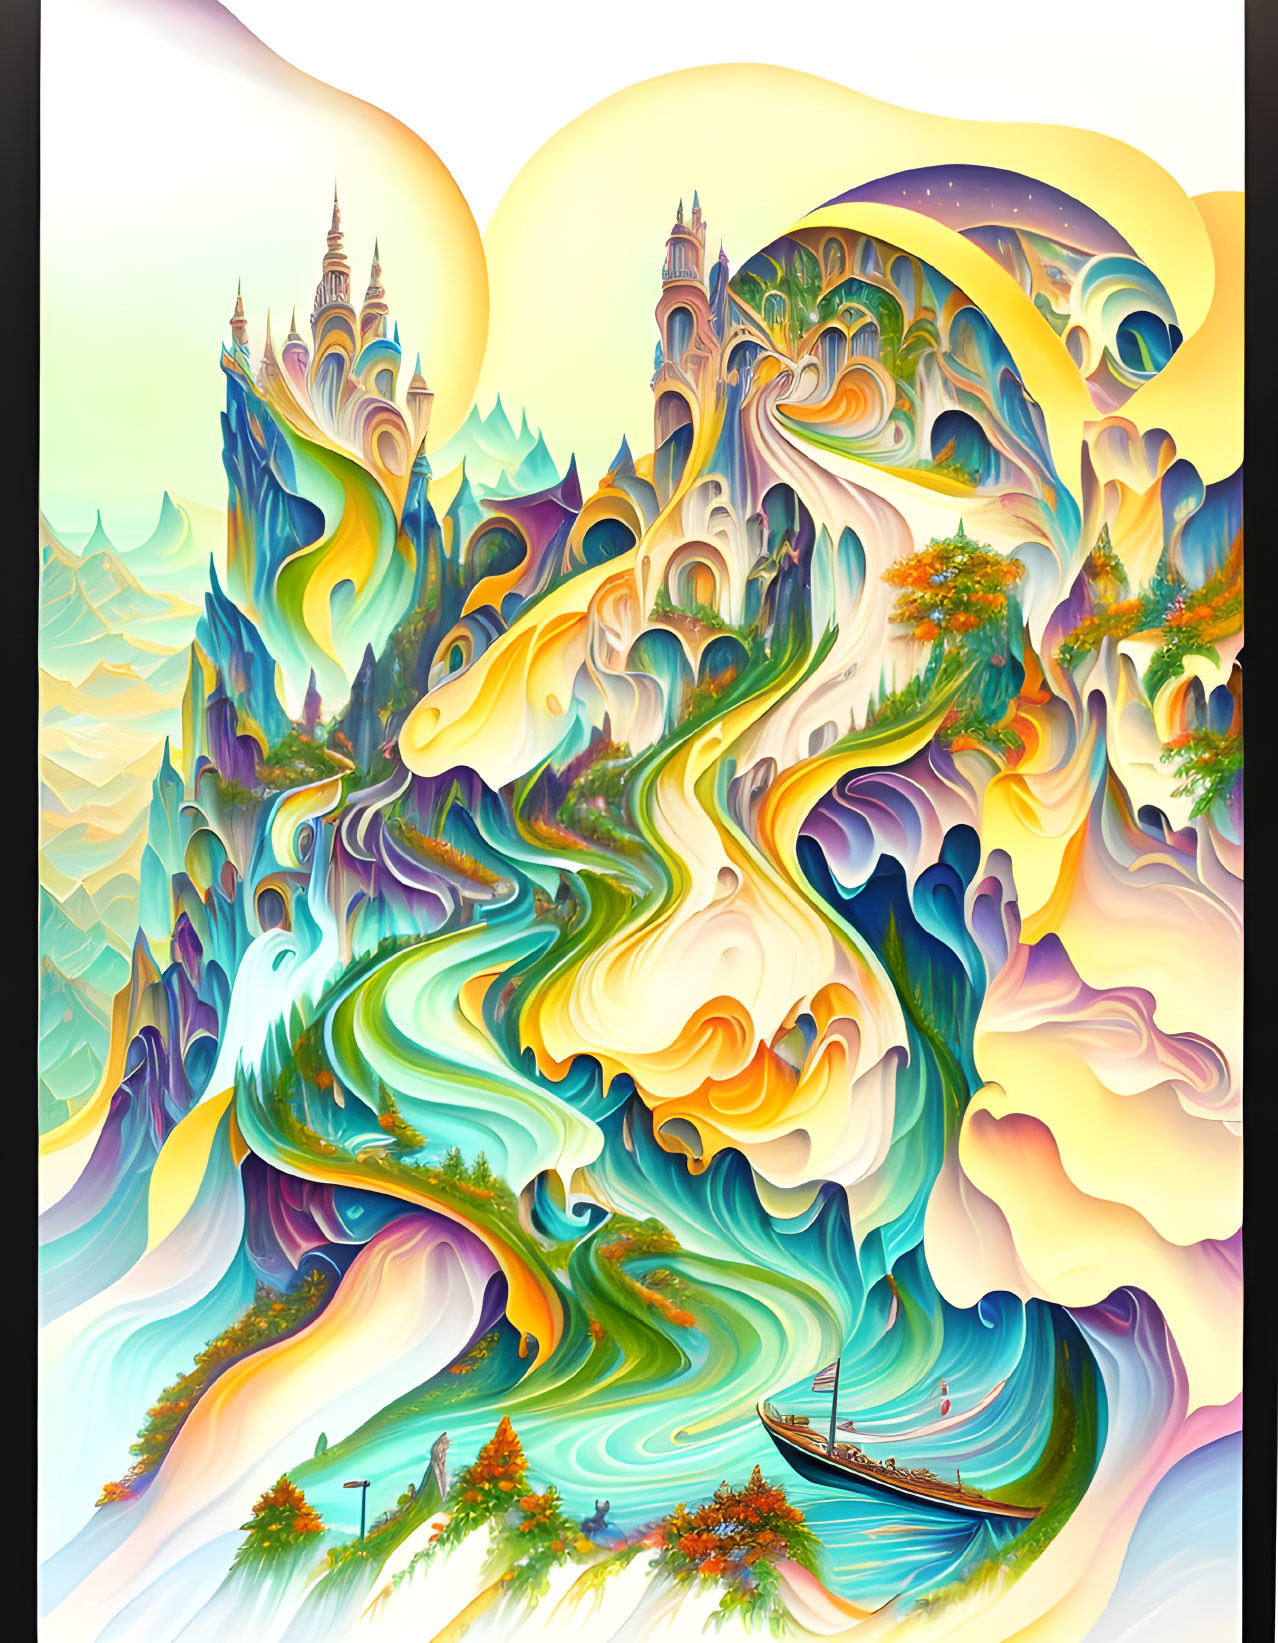 Surreal landscape with swirling patterns, rivers, castle spires, and a boat